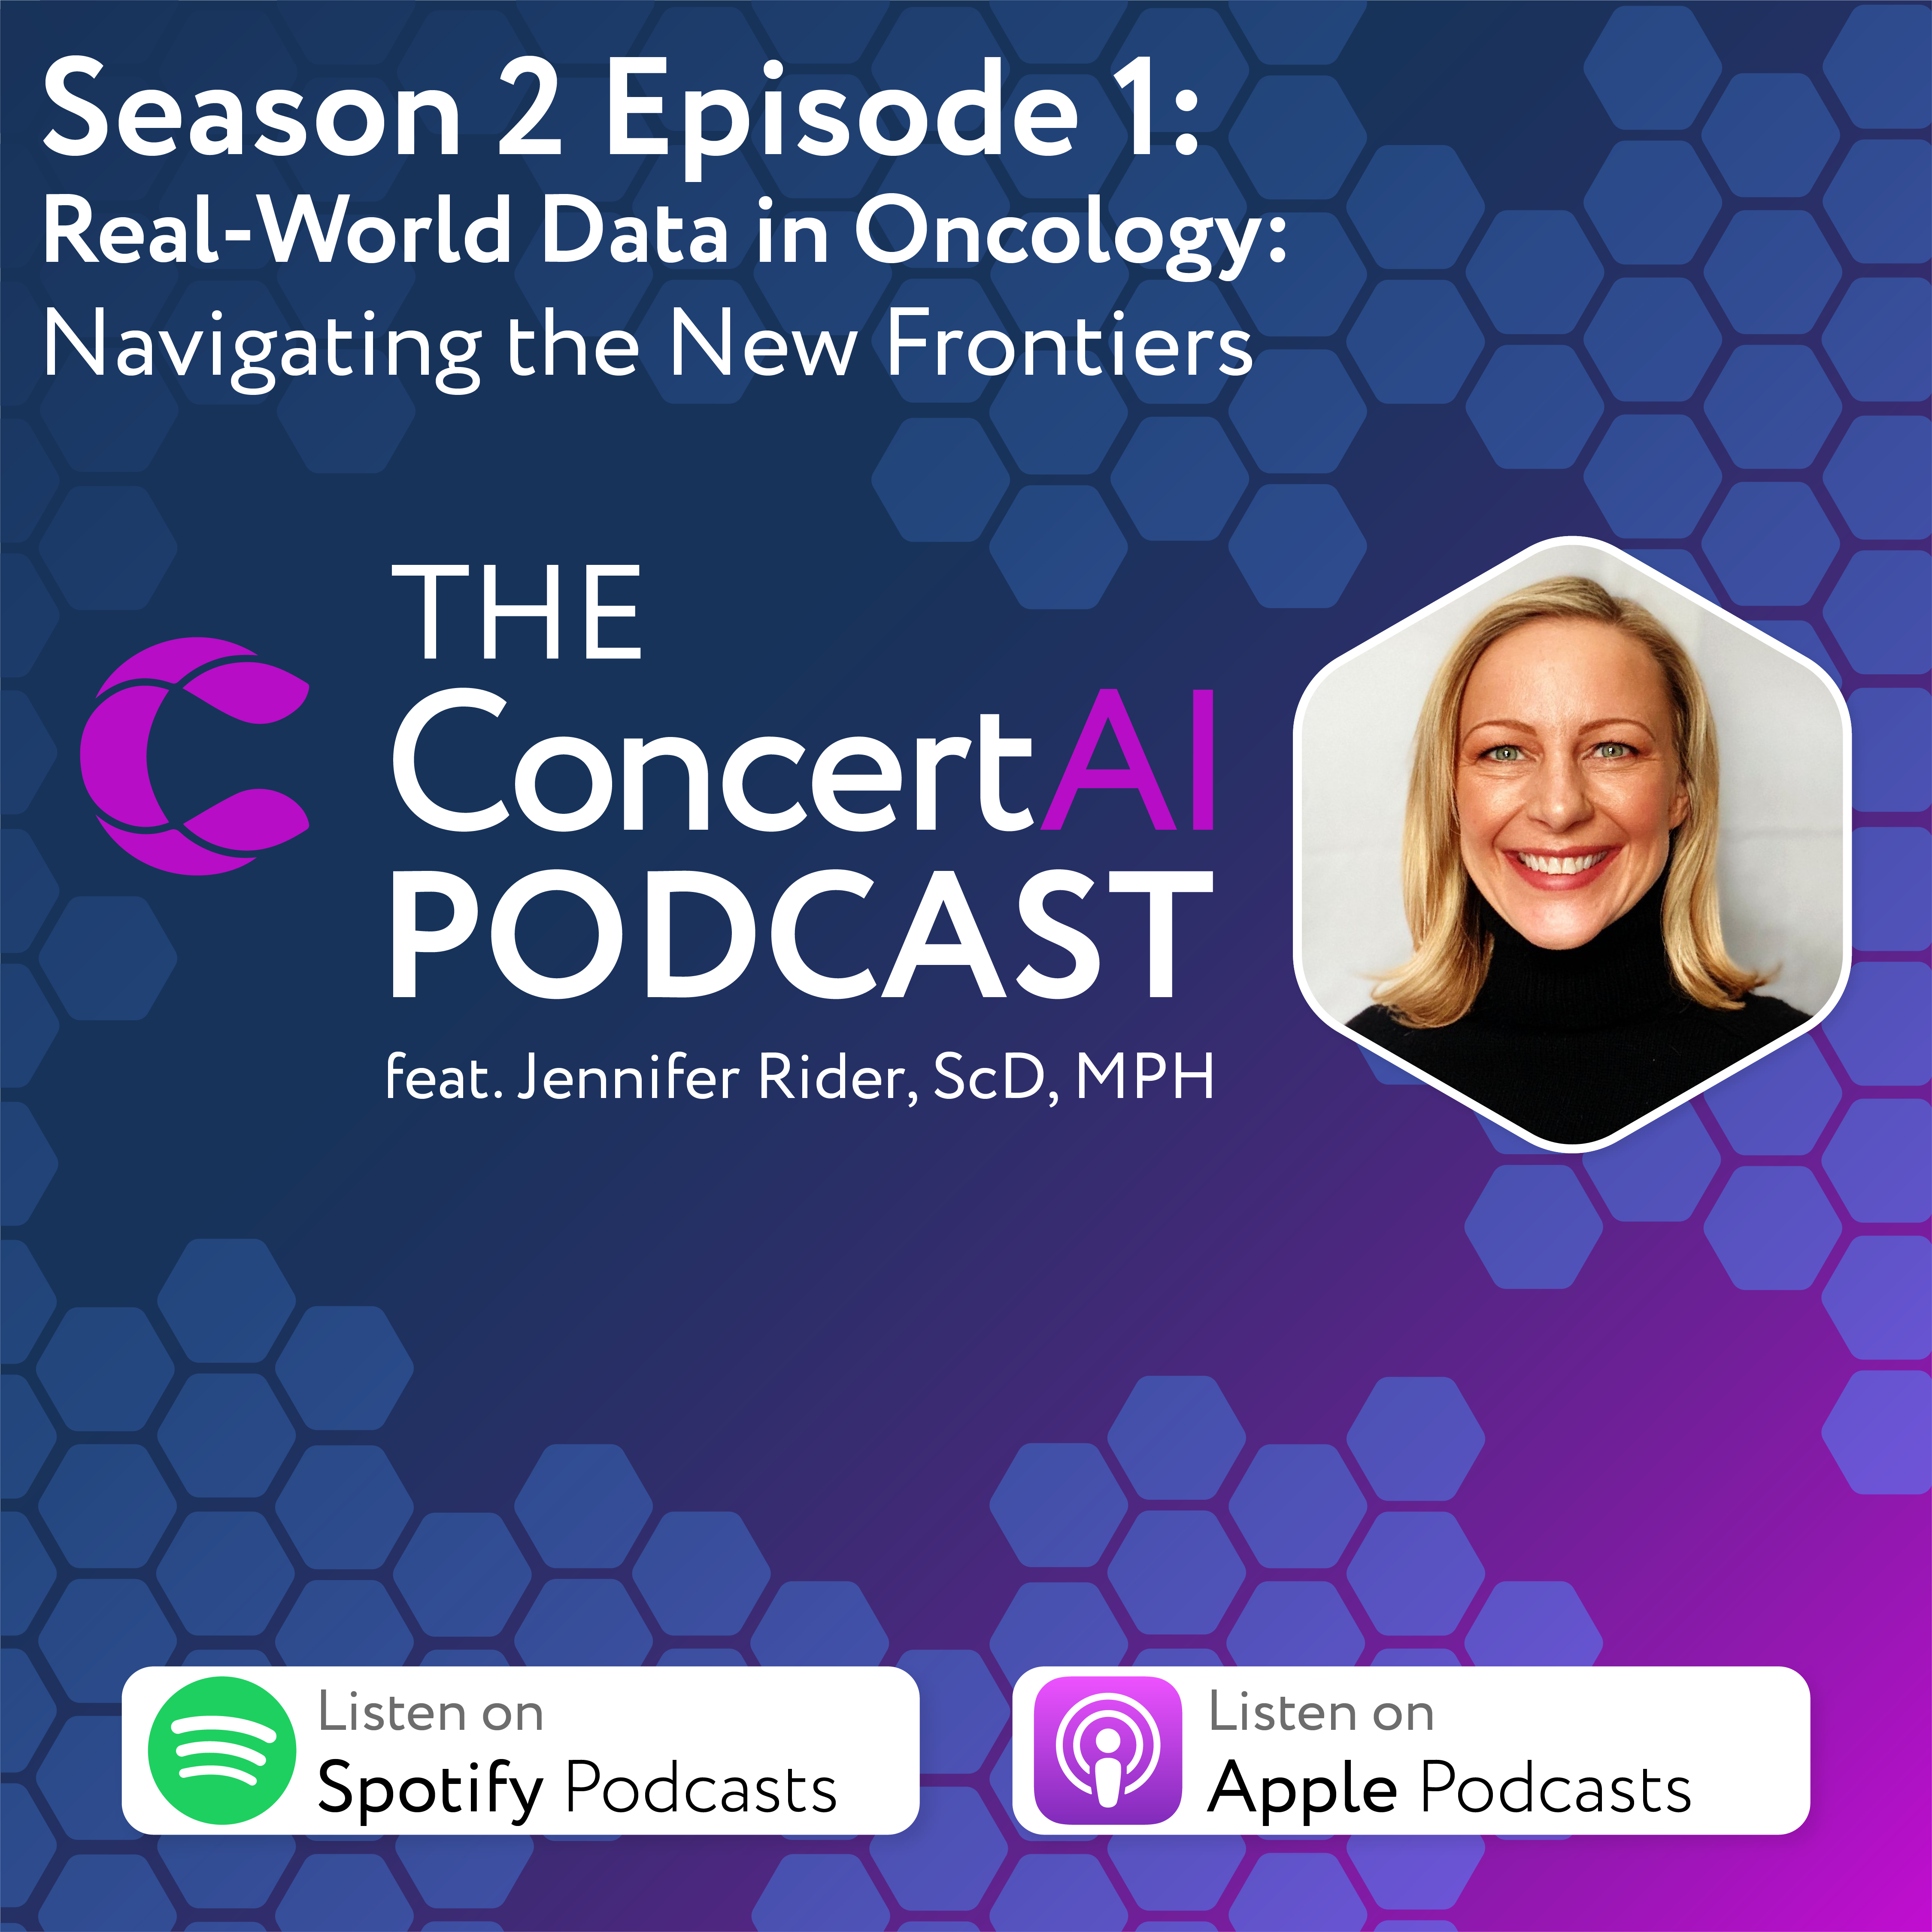 The ConcertAI Podcast | Real-World Data in Oncology: Navigating the New Frontiers feat. Jennifer Rider